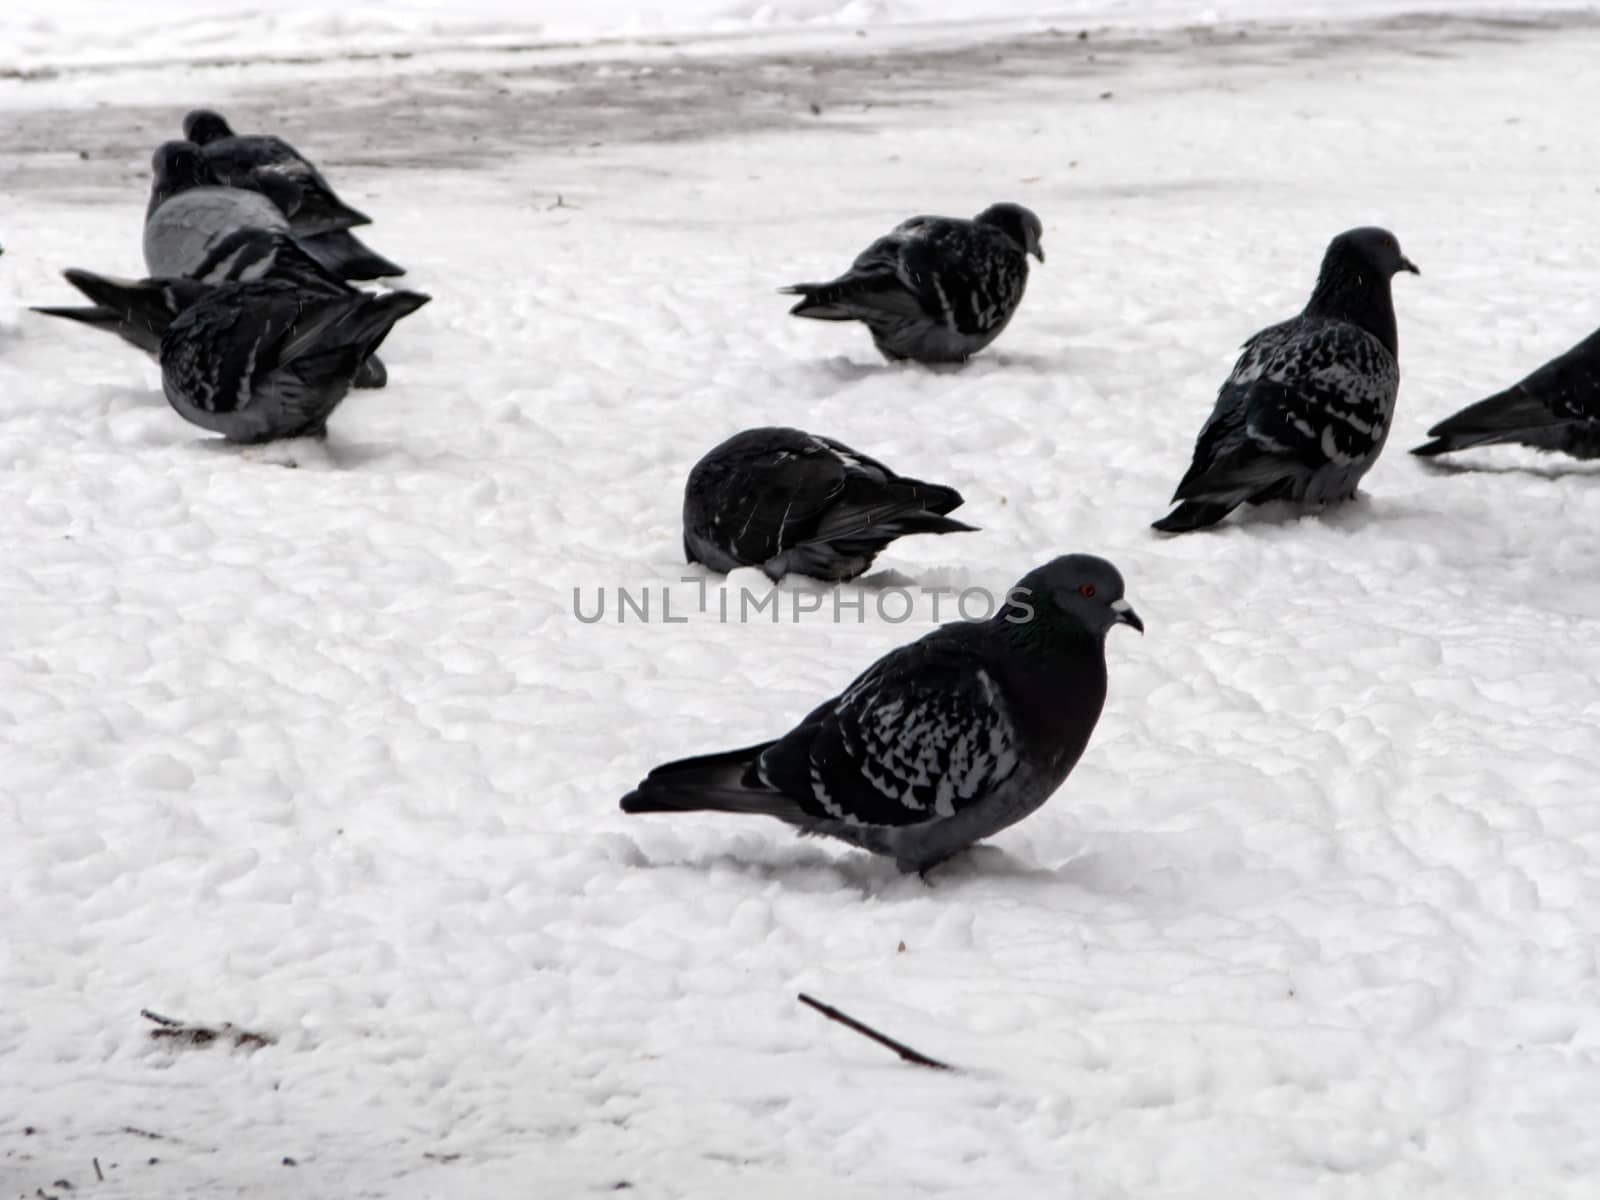 Pigeons sit in the snow in winter, it's snowing. The birds were cold and hungry.